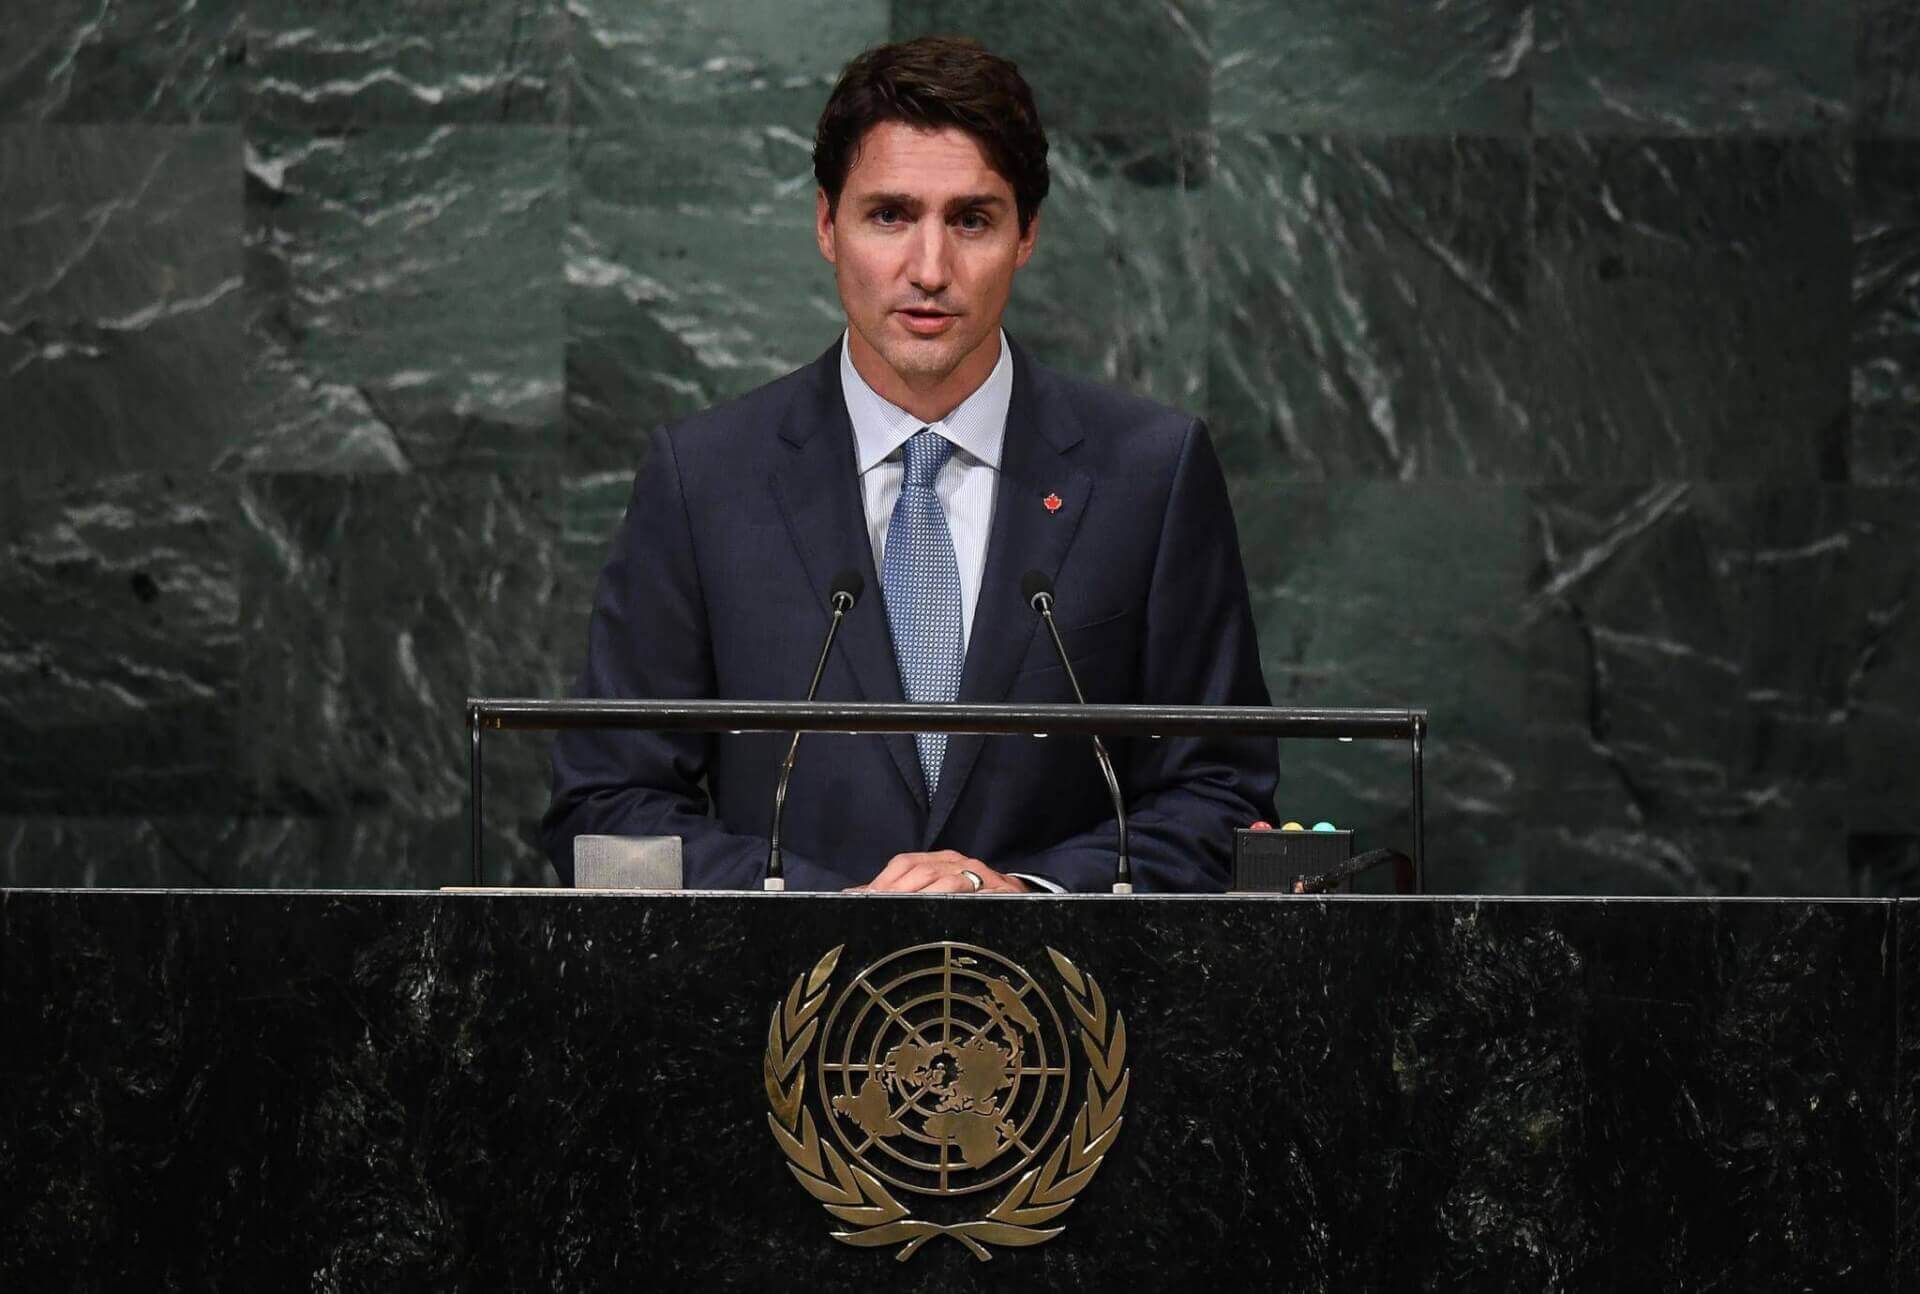 Is Trudeau’s “Two-Faced” Leadership Eroding Canada’s Diplomatic Capital?